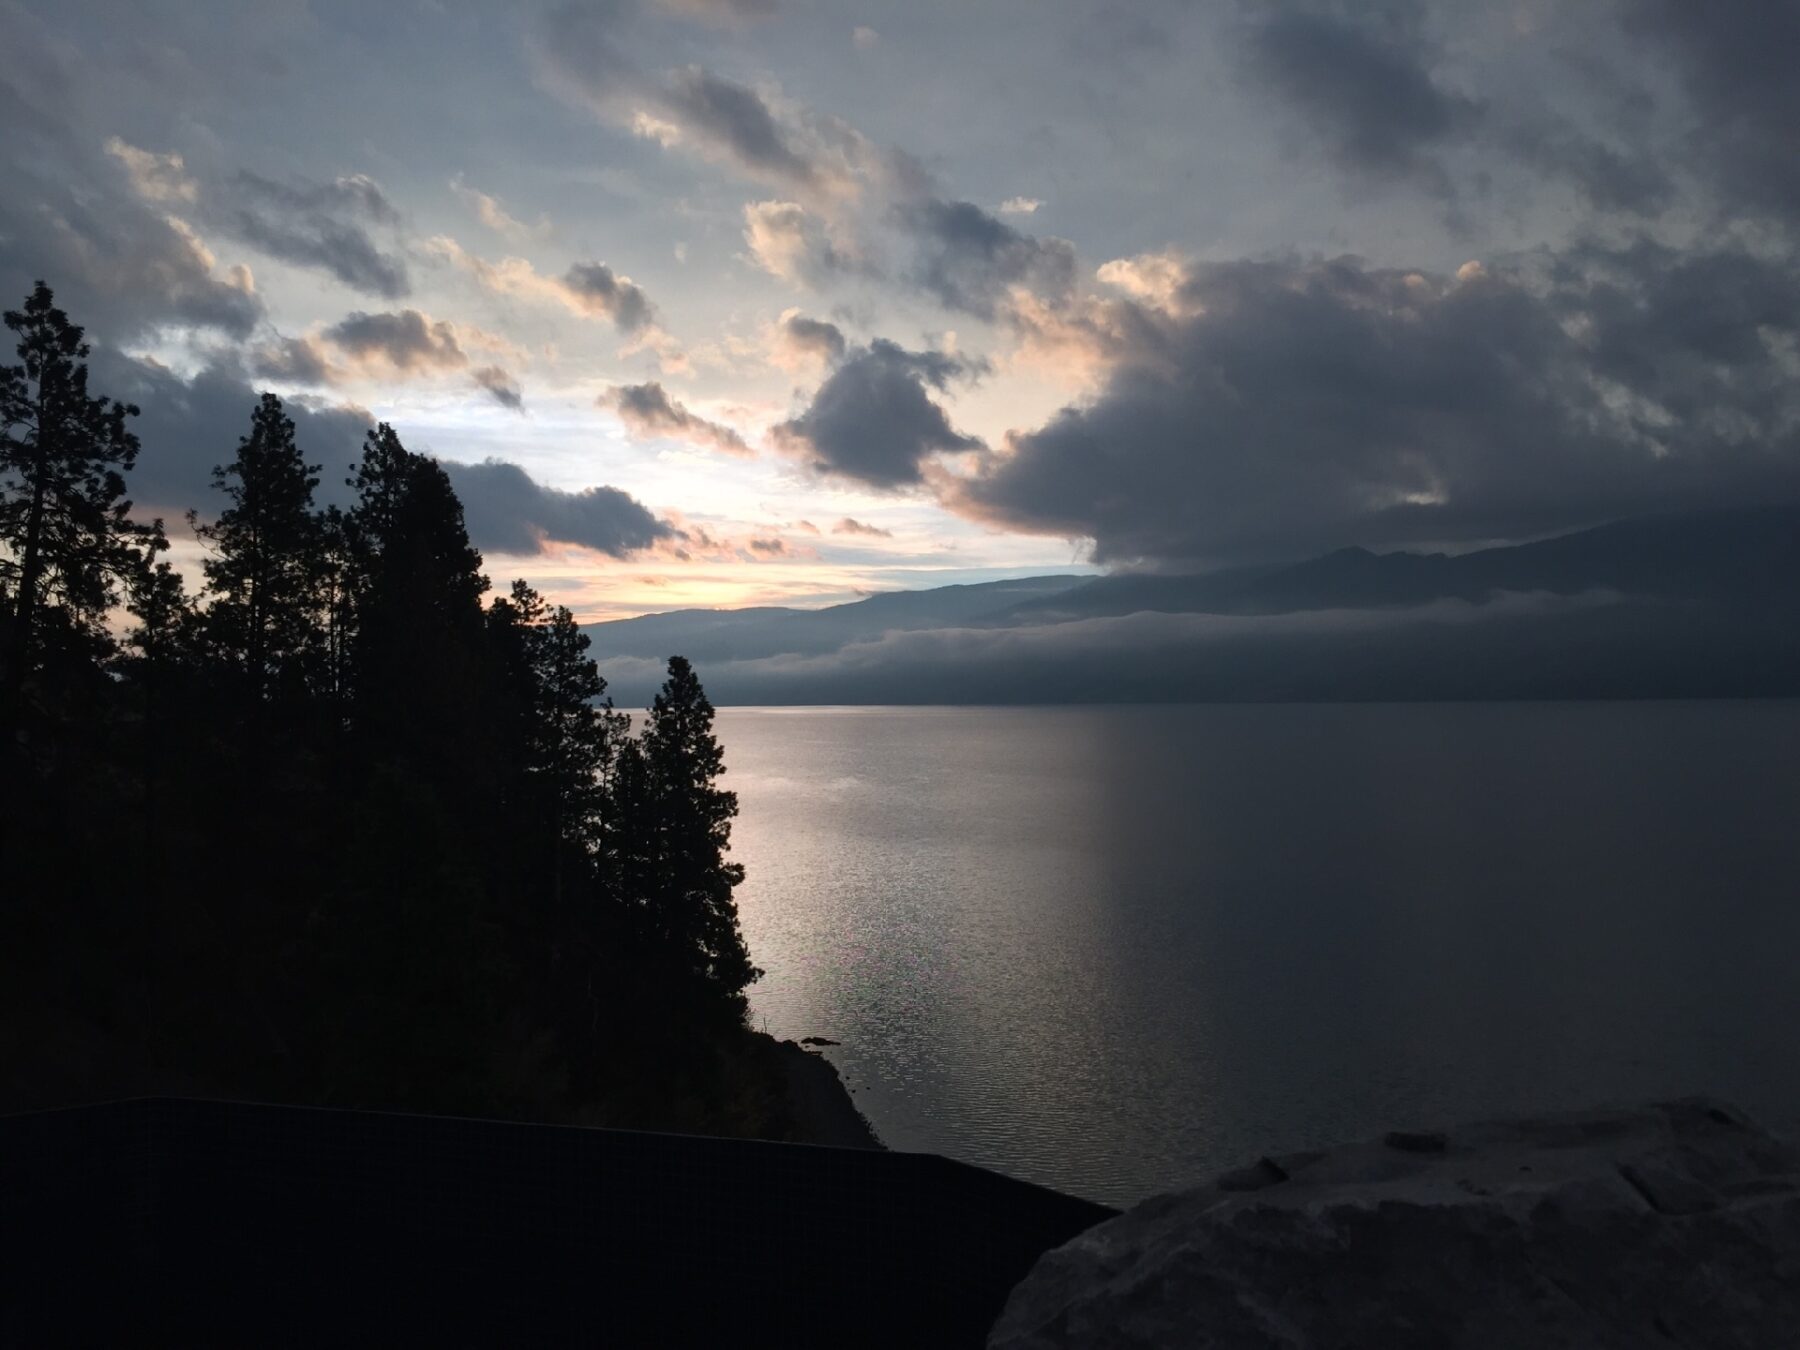 A sunrise over the pacific ocean in Bowen Island